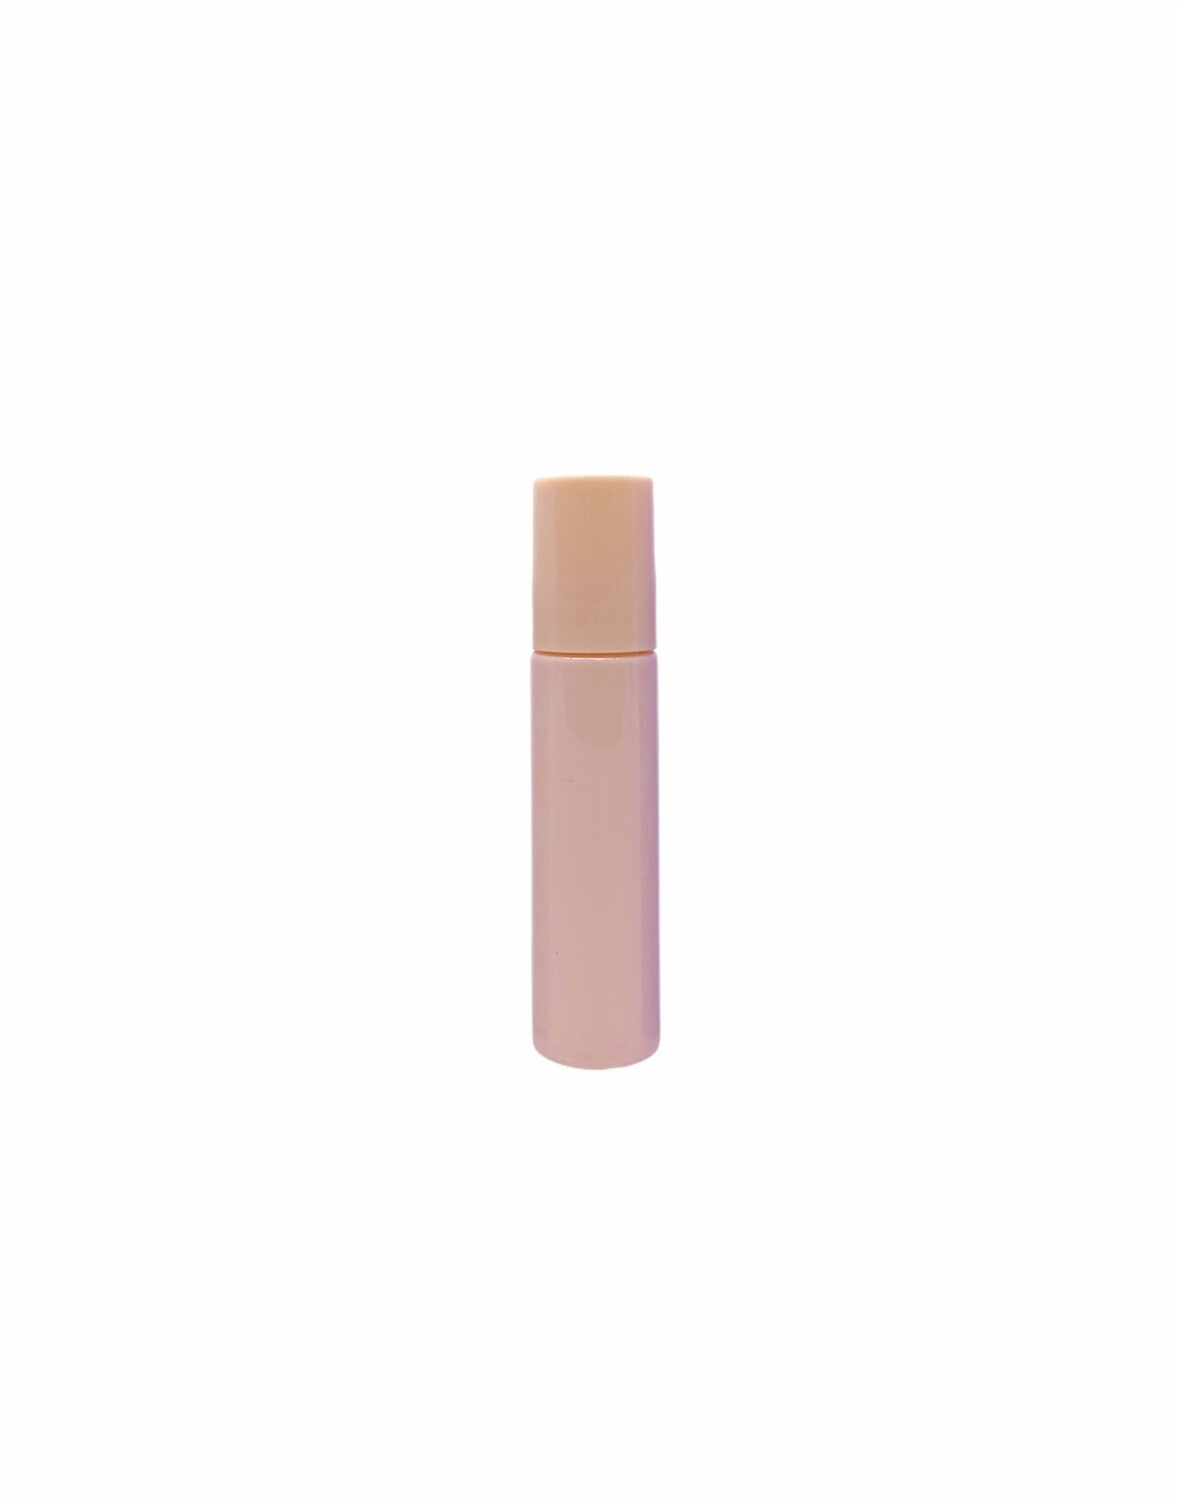 10ml, Plastic Bottle With Plastic Roller, Pastel Pink